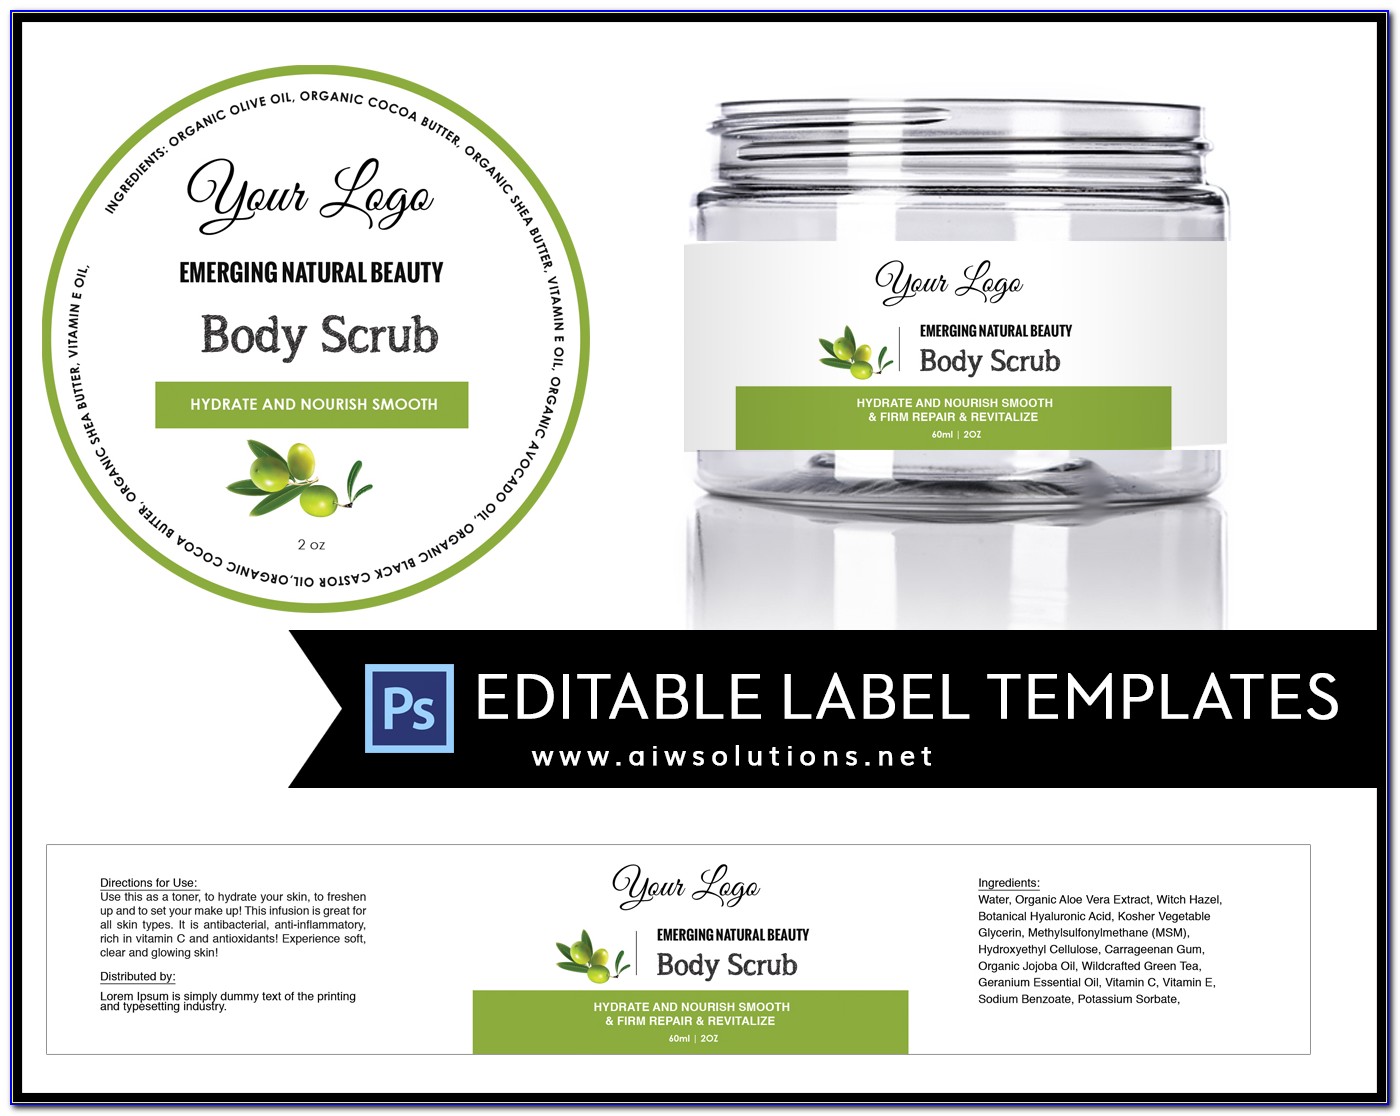 Free Label Templates For Lotion Bottles